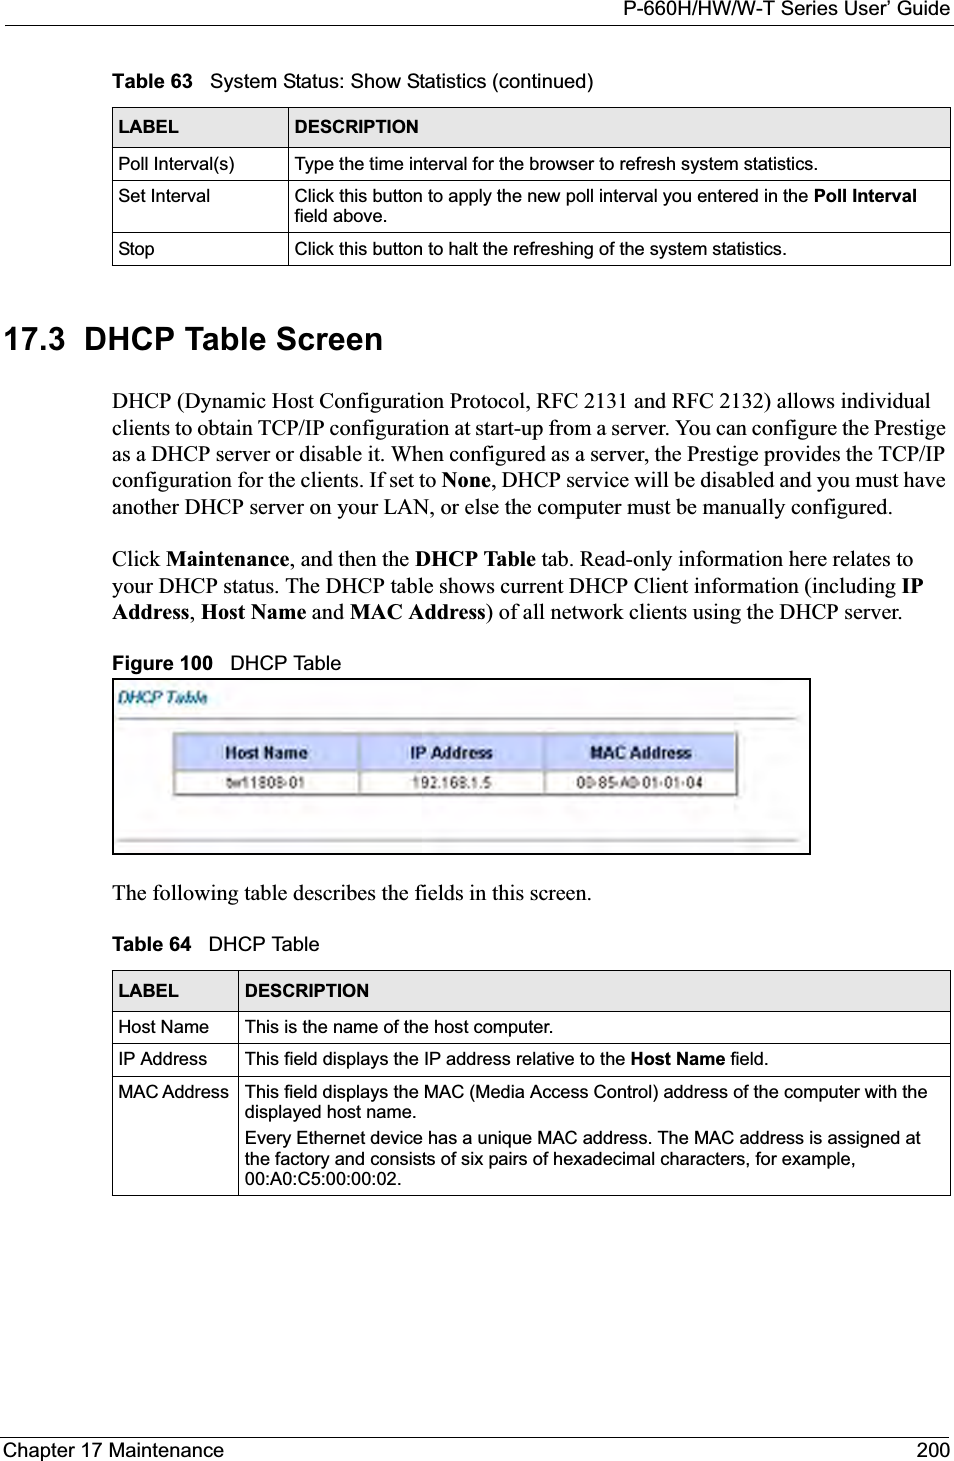 P-660H/HW/W-T Series User’ GuideChapter 17 Maintenance 20017.3  DHCP Table Screen DHCP (Dynamic Host Configuration Protocol, RFC 2131 and RFC 2132) allows individual clients to obtain TCP/IP configuration at start-up from a server. You can configure the Prestige as a DHCP server or disable it. When configured as a server, the Prestige provides the TCP/IP configuration for the clients. If set to None, DHCP service will be disabled and you must have another DHCP server on your LAN, or else the computer must be manually configured.Click Maintenance, and then the DHCP Table tab. Read-only information here relates to your DHCP status. The DHCP table shows current DHCP Client information (including IPAddress,Host Name and MAC Address) of all network clients using the DHCP server.Figure 100   DHCP TableThe following table describes the fields in this screen.  Poll Interval(s) Type the time interval for the browser to refresh system statistics.Set Interval Click this button to apply the new poll interval you entered in the Poll Intervalfield above.Stop Click this button to halt the refreshing of the system statistics.Table 63   System Status: Show Statistics (continued)LABEL DESCRIPTIONTable 64   DHCP TableLABEL DESCRIPTIONHost Name This is the name of the host computer.IP Address This field displays the IP address relative to the Host Name field. MAC Address  This field displays the MAC (Media Access Control) address of the computer with the displayed host name.Every Ethernet device has a unique MAC address. The MAC address is assigned at the factory and consists of six pairs of hexadecimal characters, for example, 00:A0:C5:00:00:02.